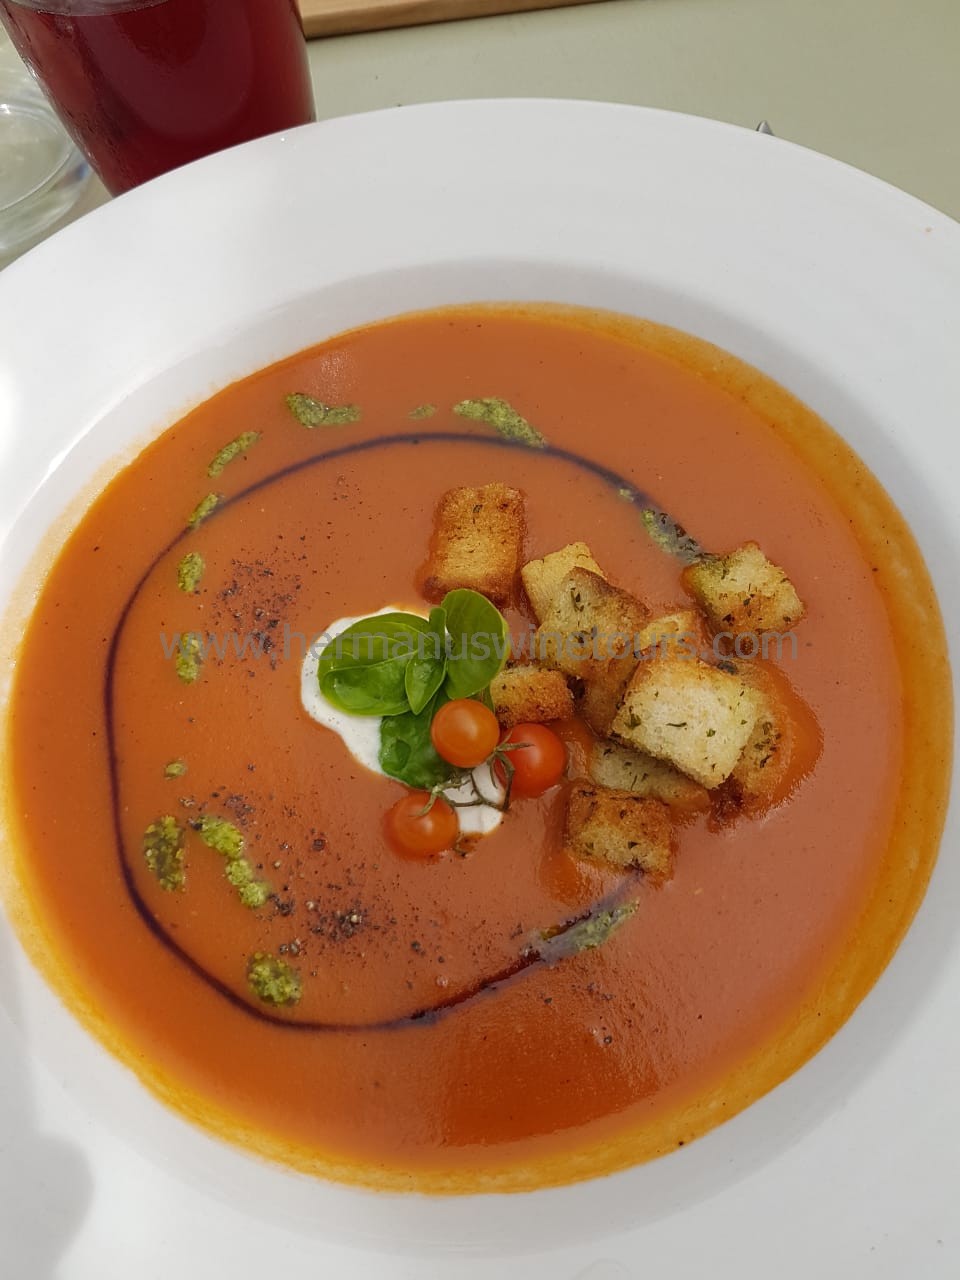 Creamy Tomato soup, pesto, croutons, Hermanus restaurant, near Cape Town, South Africa